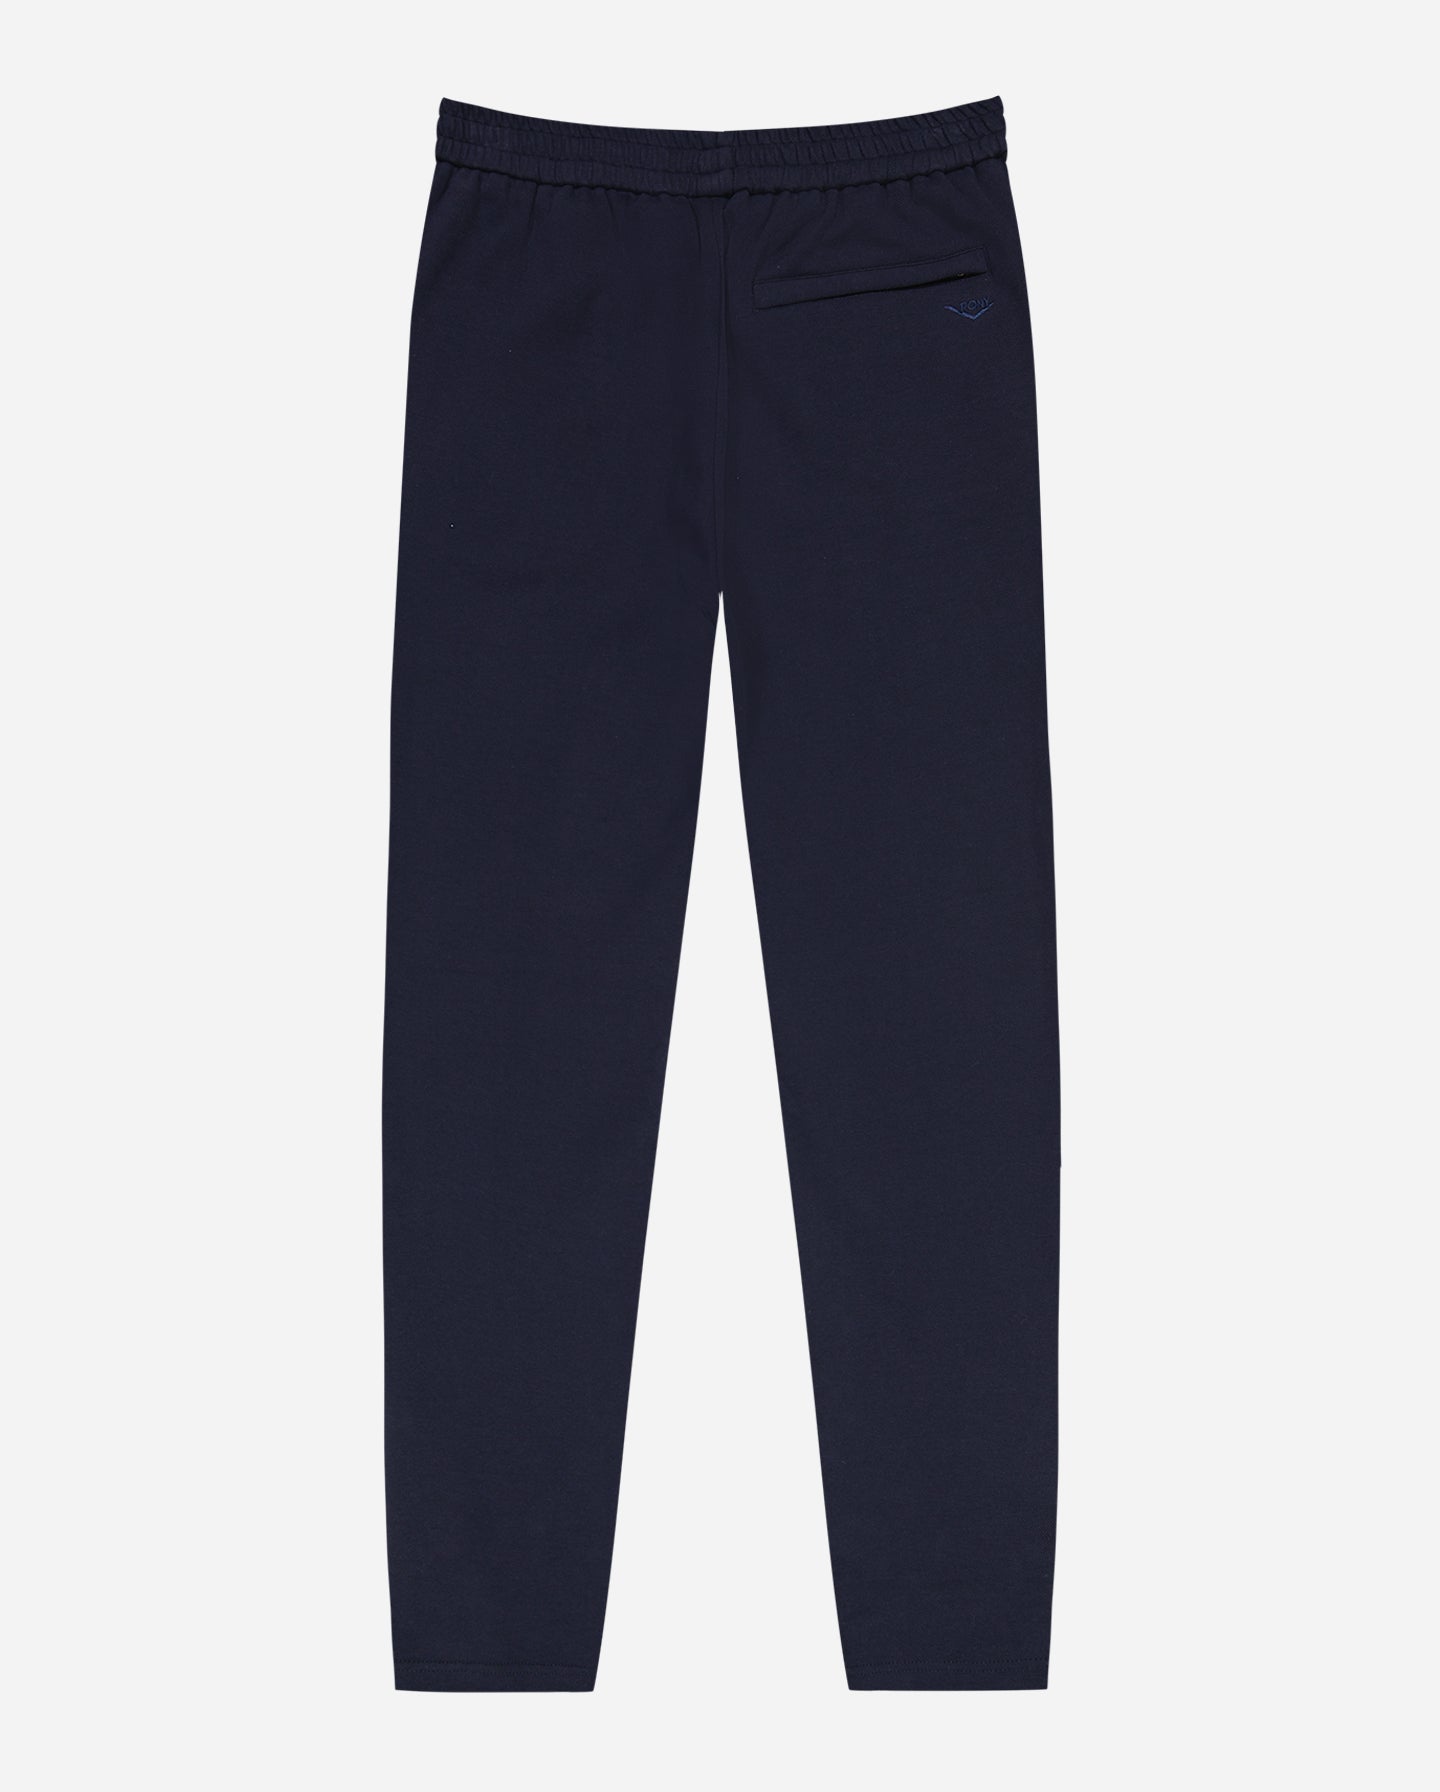 Navy Blue Trousers & Chinos | adidas India